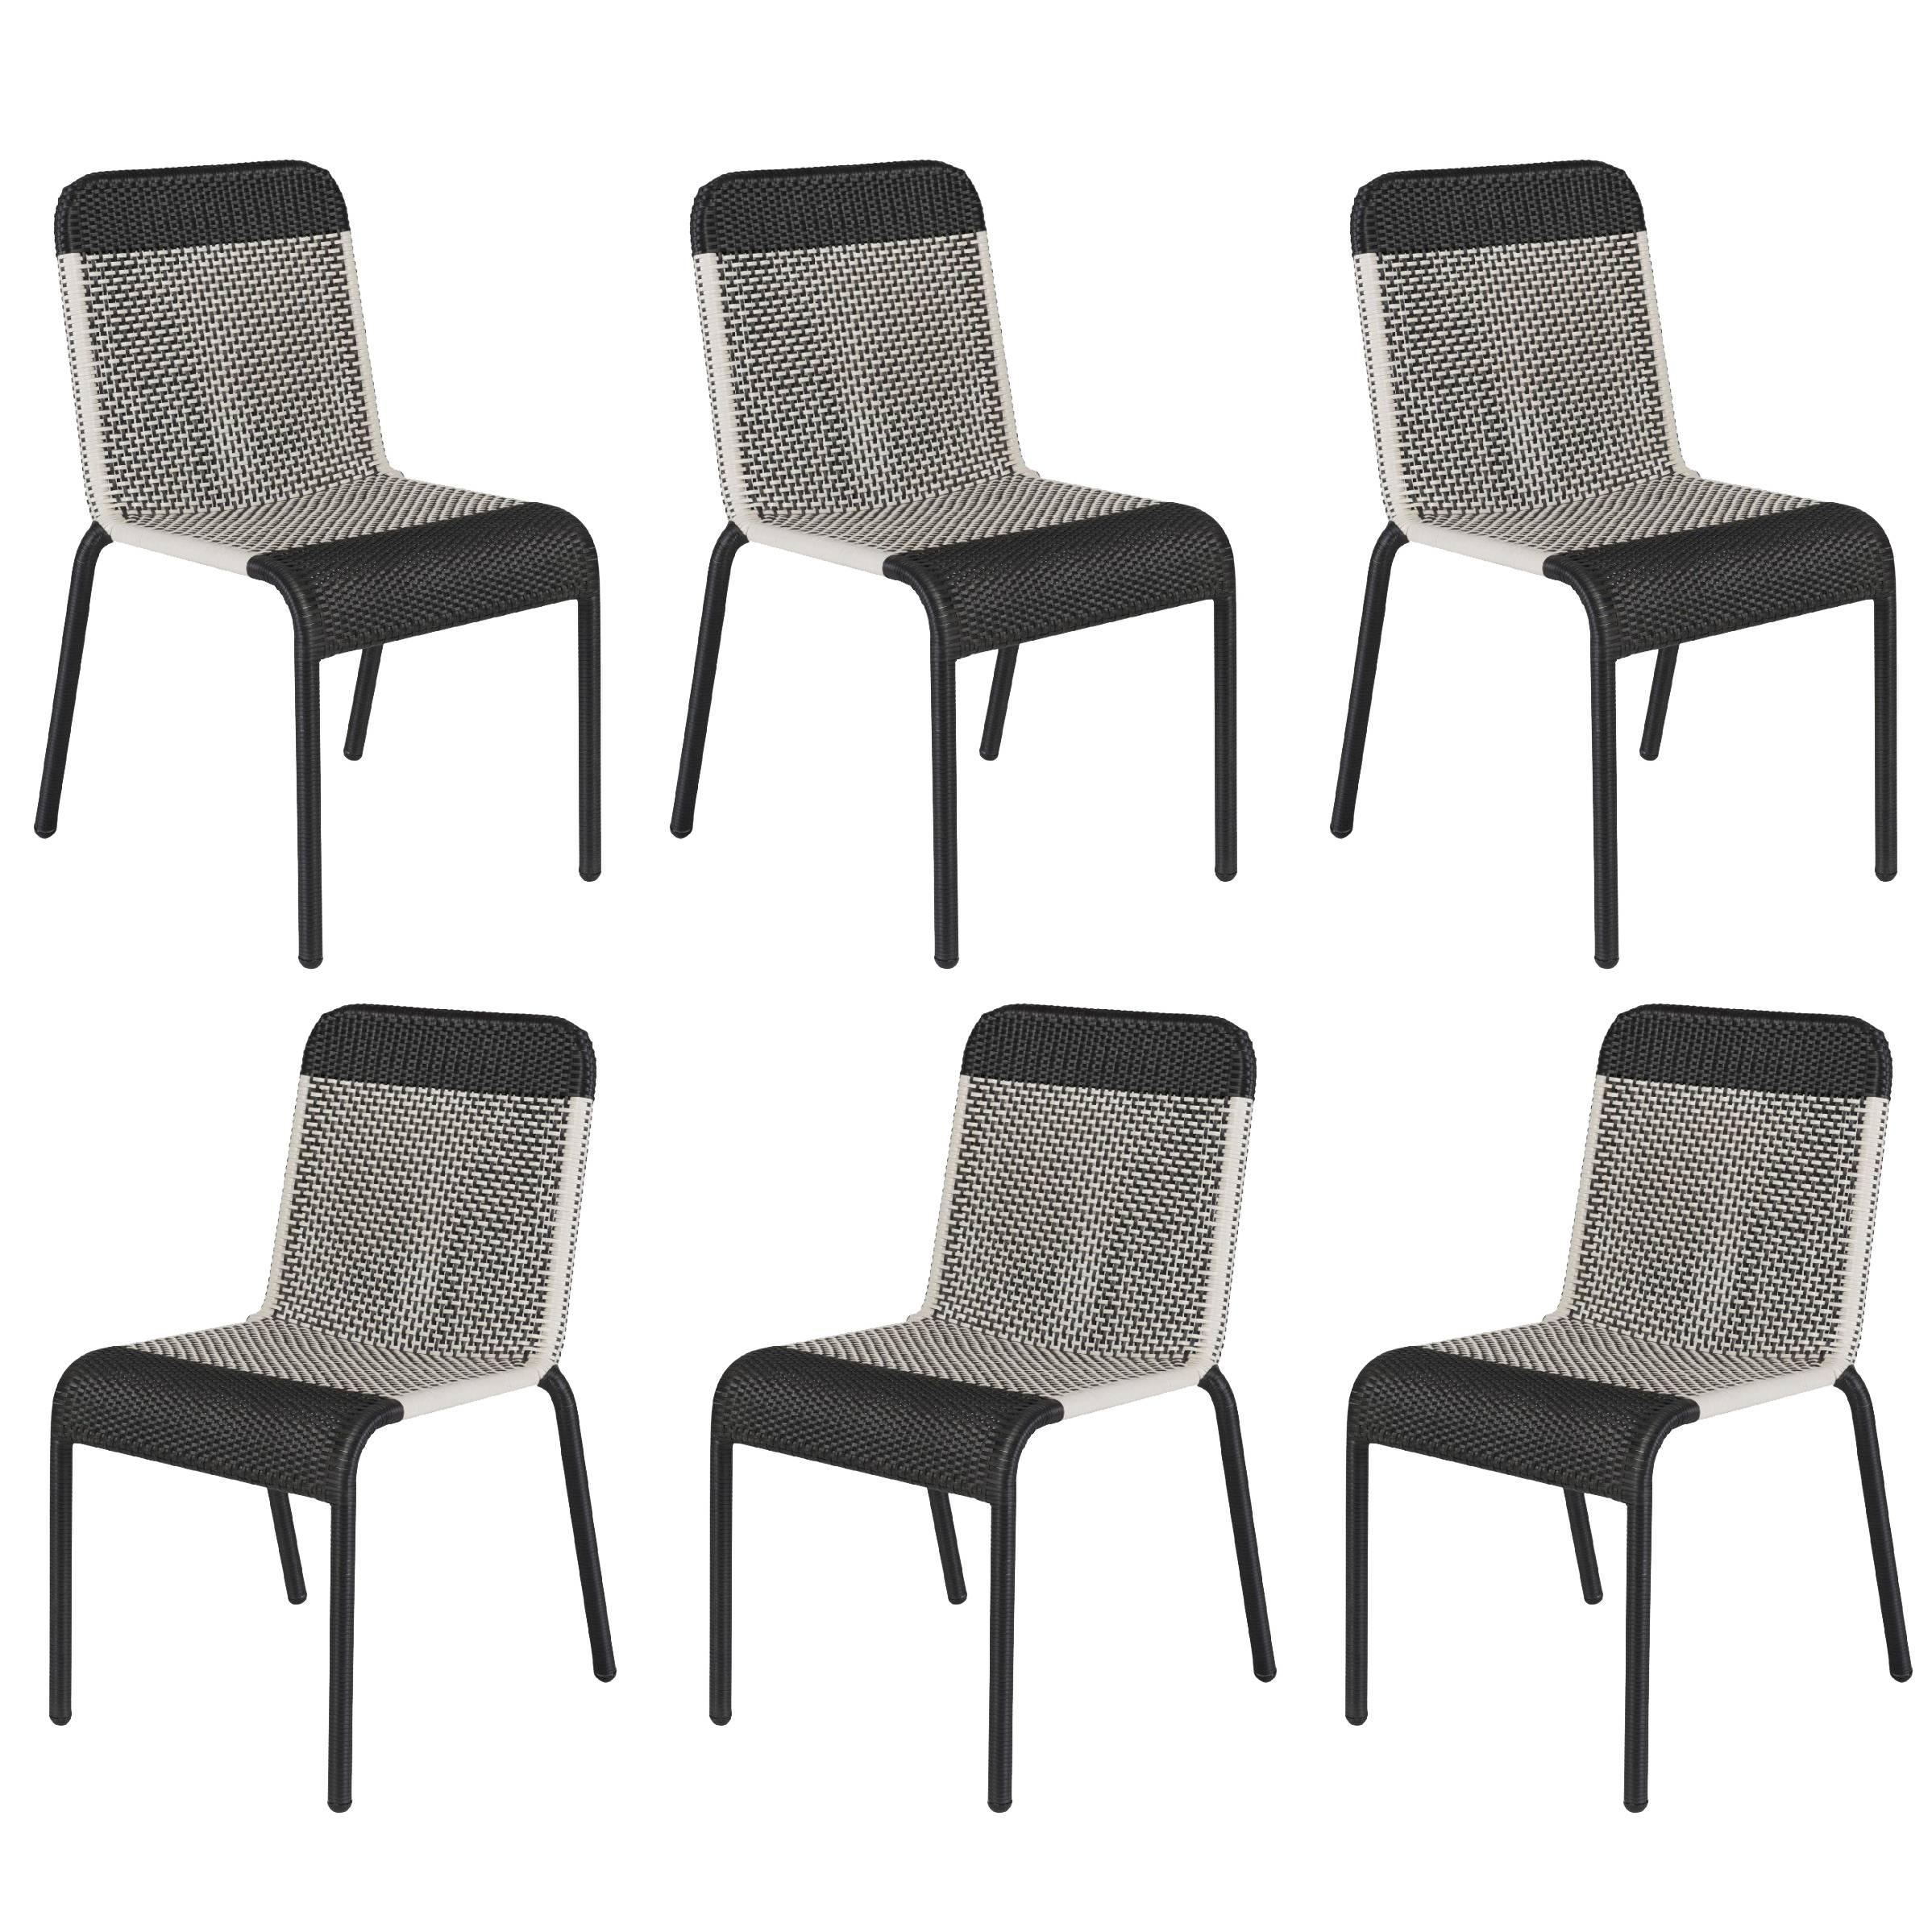 Set of Six Black and White Resin Stackable Chairs